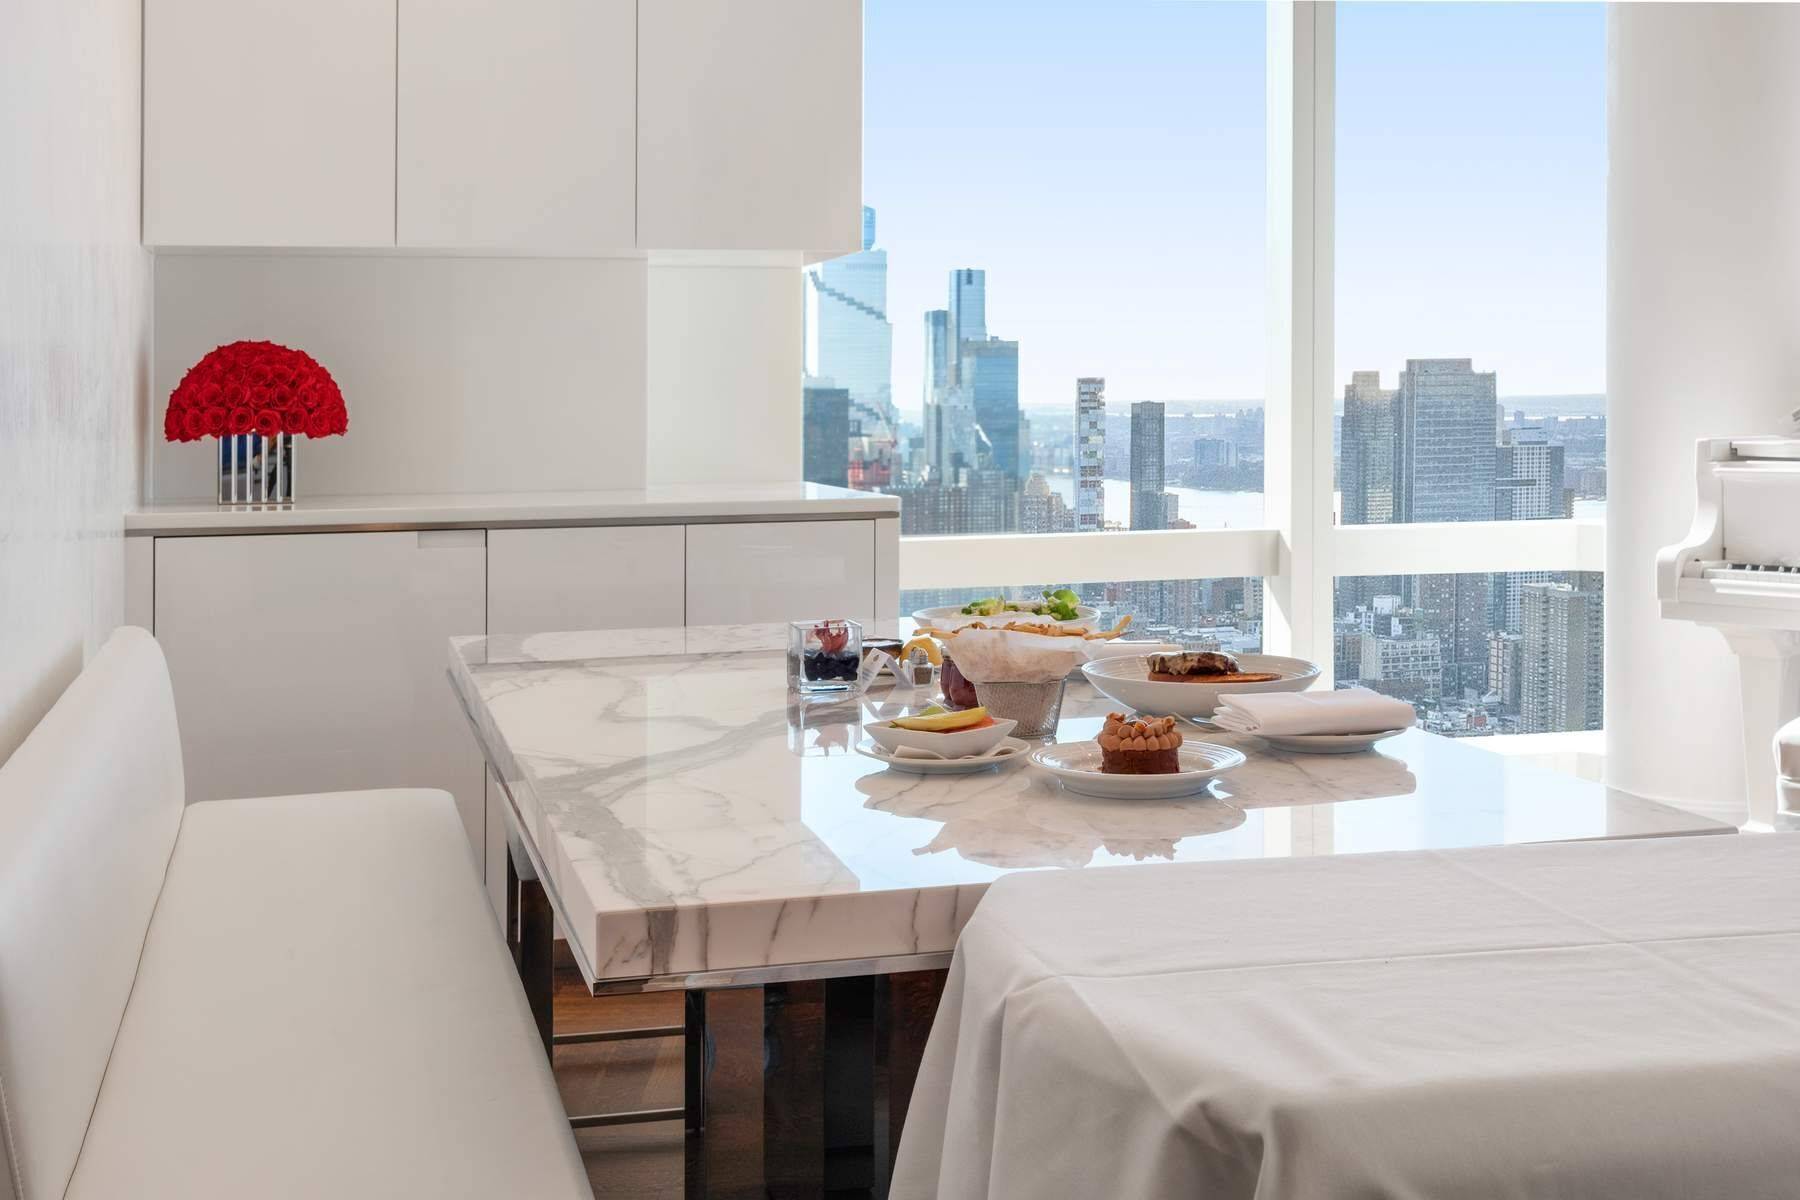 Located on the 69th floor, a spectacular apartment with museum quality finishes and all custom made furniture from Italy is available at Residences at the Mandarin Oriental, NY.